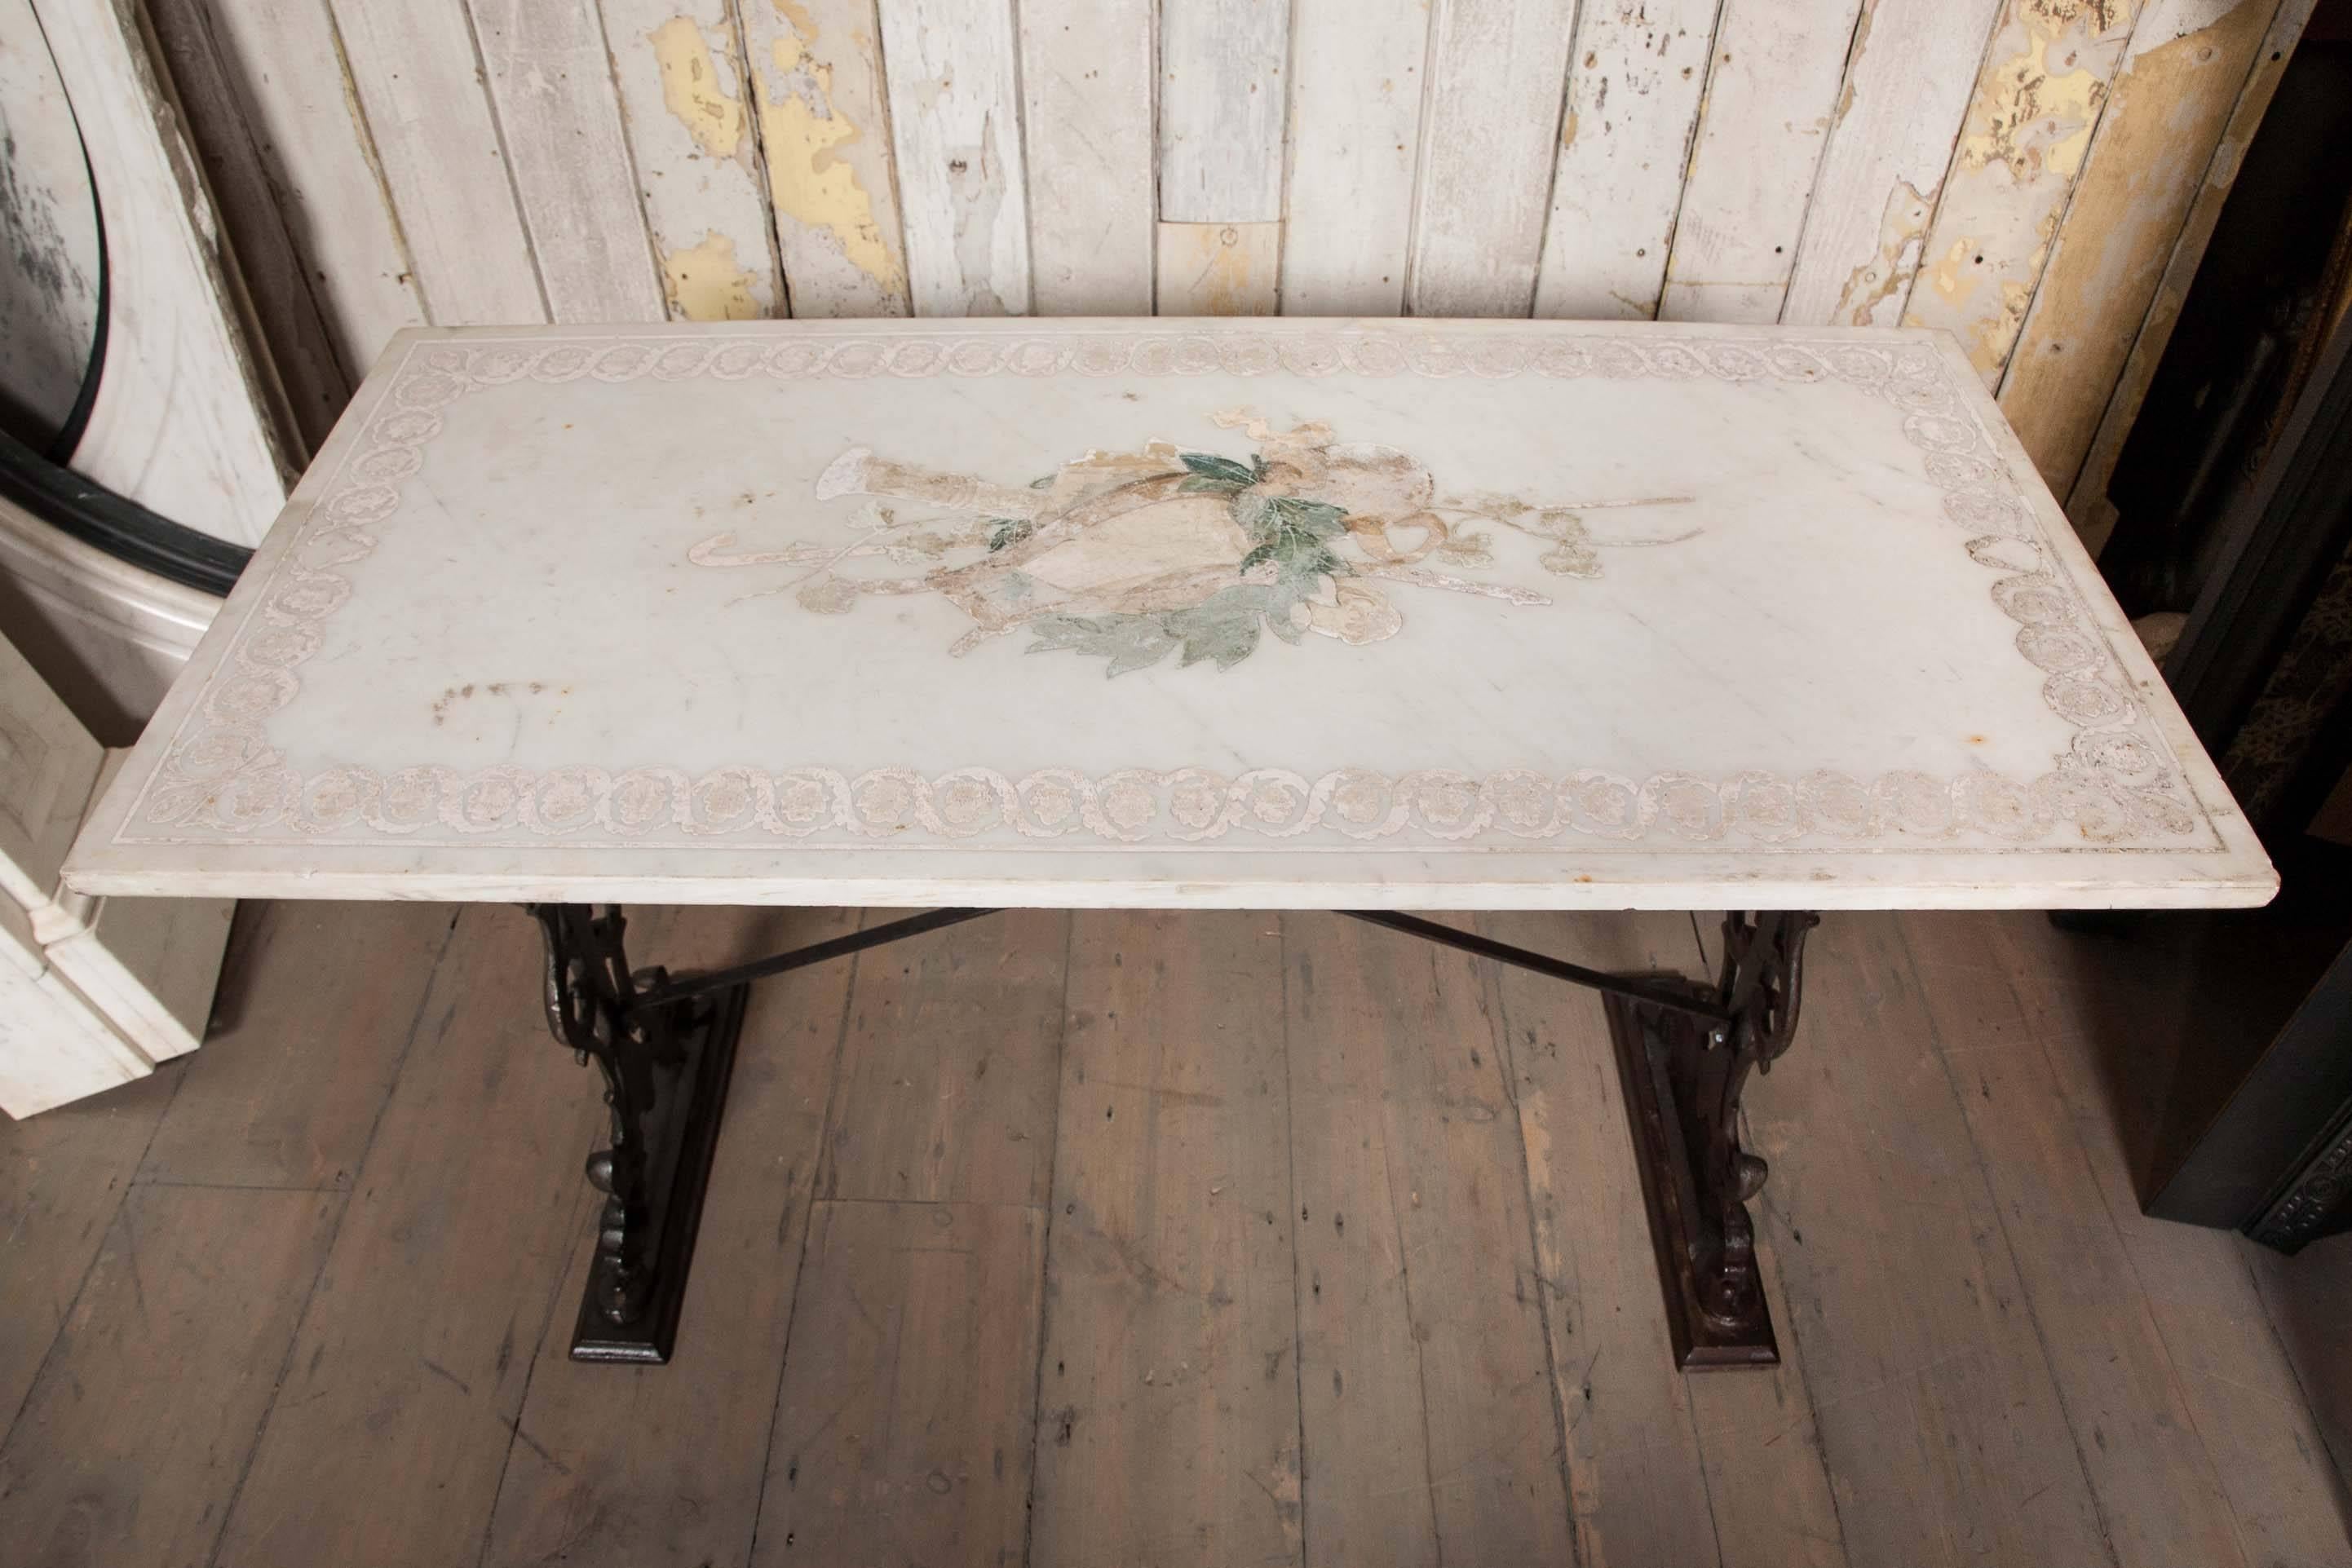 An original early Victorian marble tabletop on an ornately cast iron base. The table features a delicate neoclassical inlaid design with a lyre, a horn, a shepherd's crook and a wreath, surrounding by a floral border. The iron base is in the typical